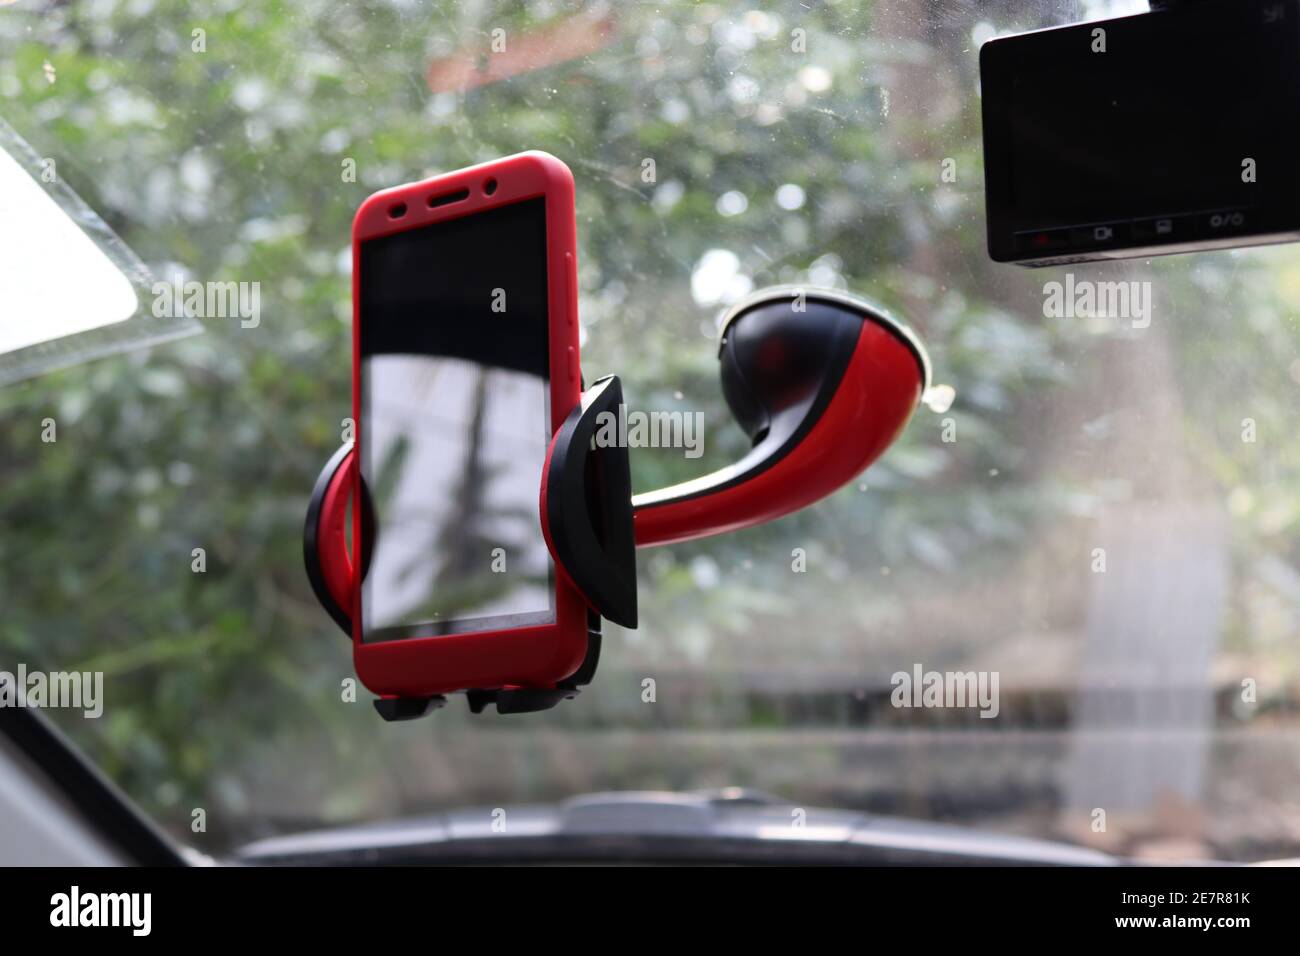 A mobile phone with a phone holder in red, in a car. Stock Photo